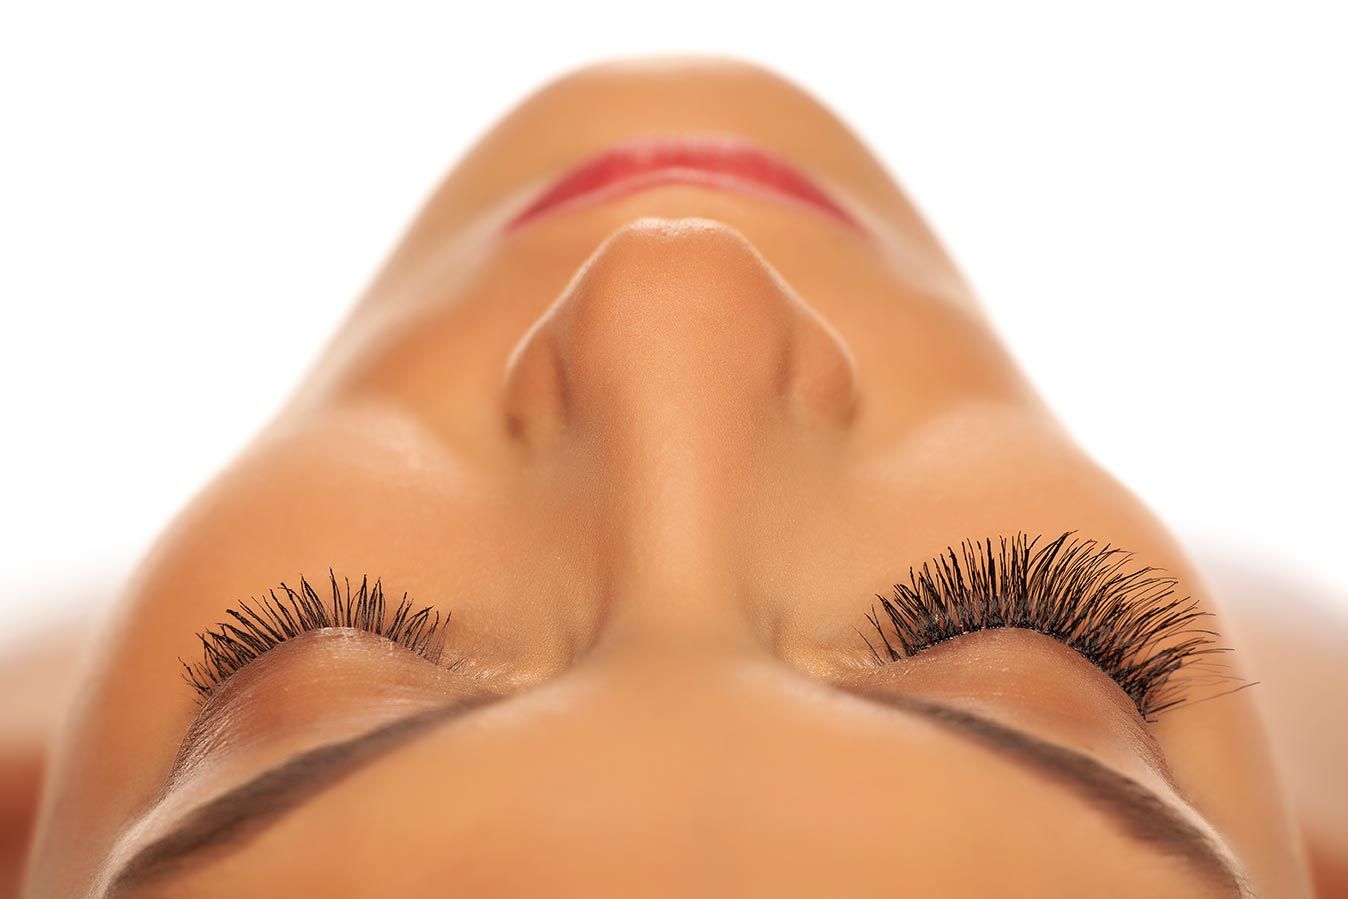 Eyelash extensions at Aristocracy Salon & Day Spa in Plymouth, MA